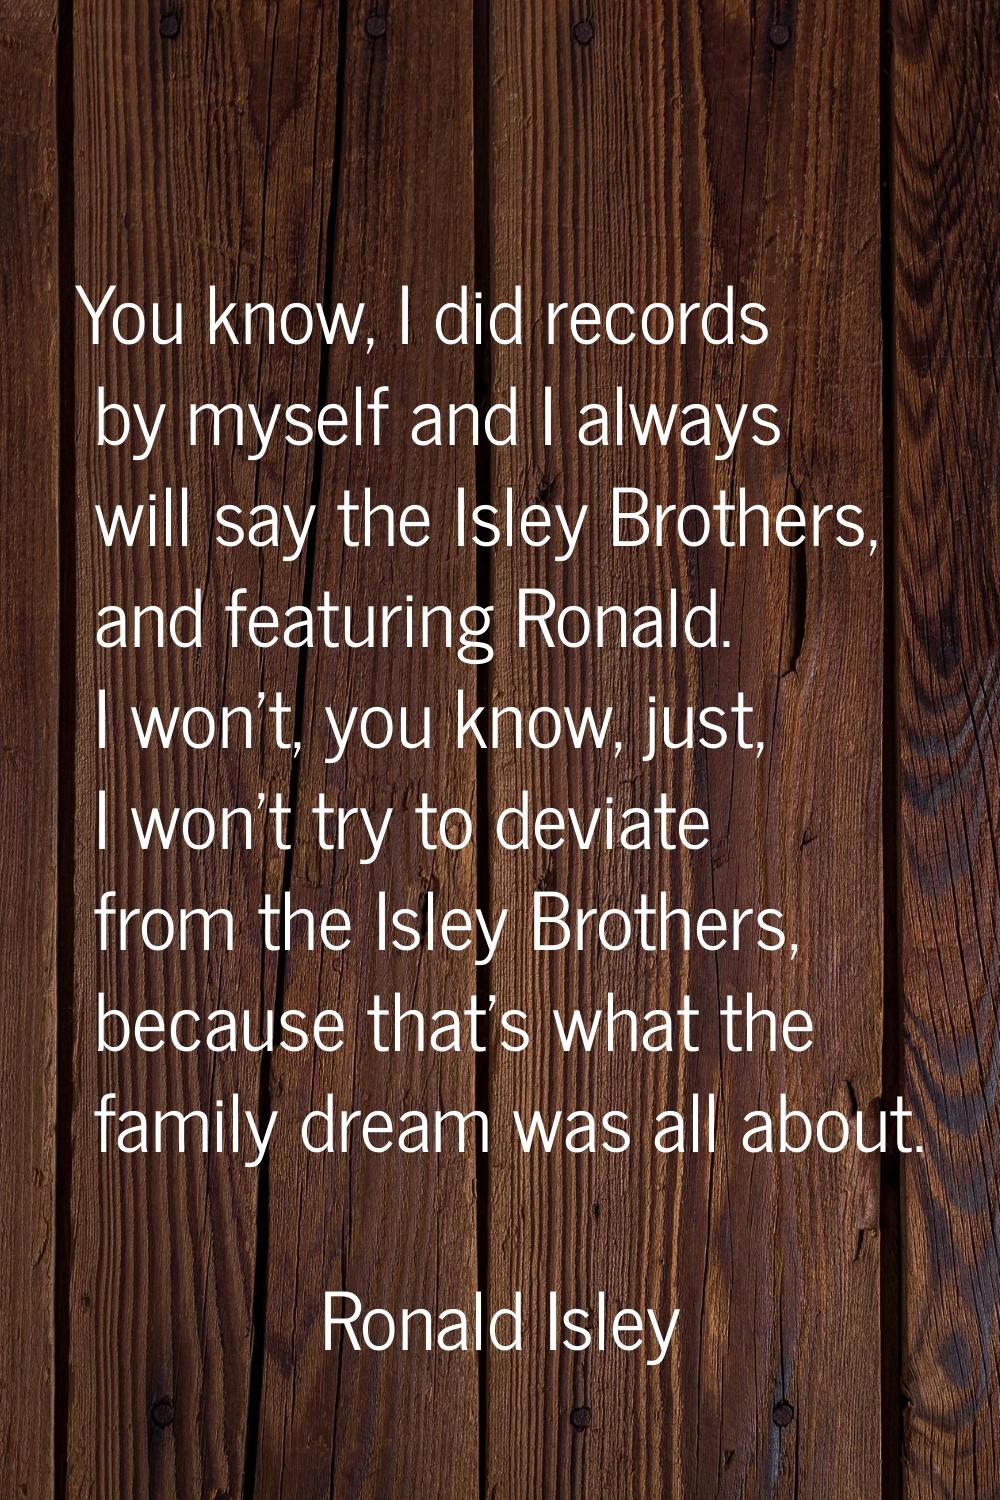 You know, I did records by myself and I always will say the Isley Brothers, and featuring Ronald. I